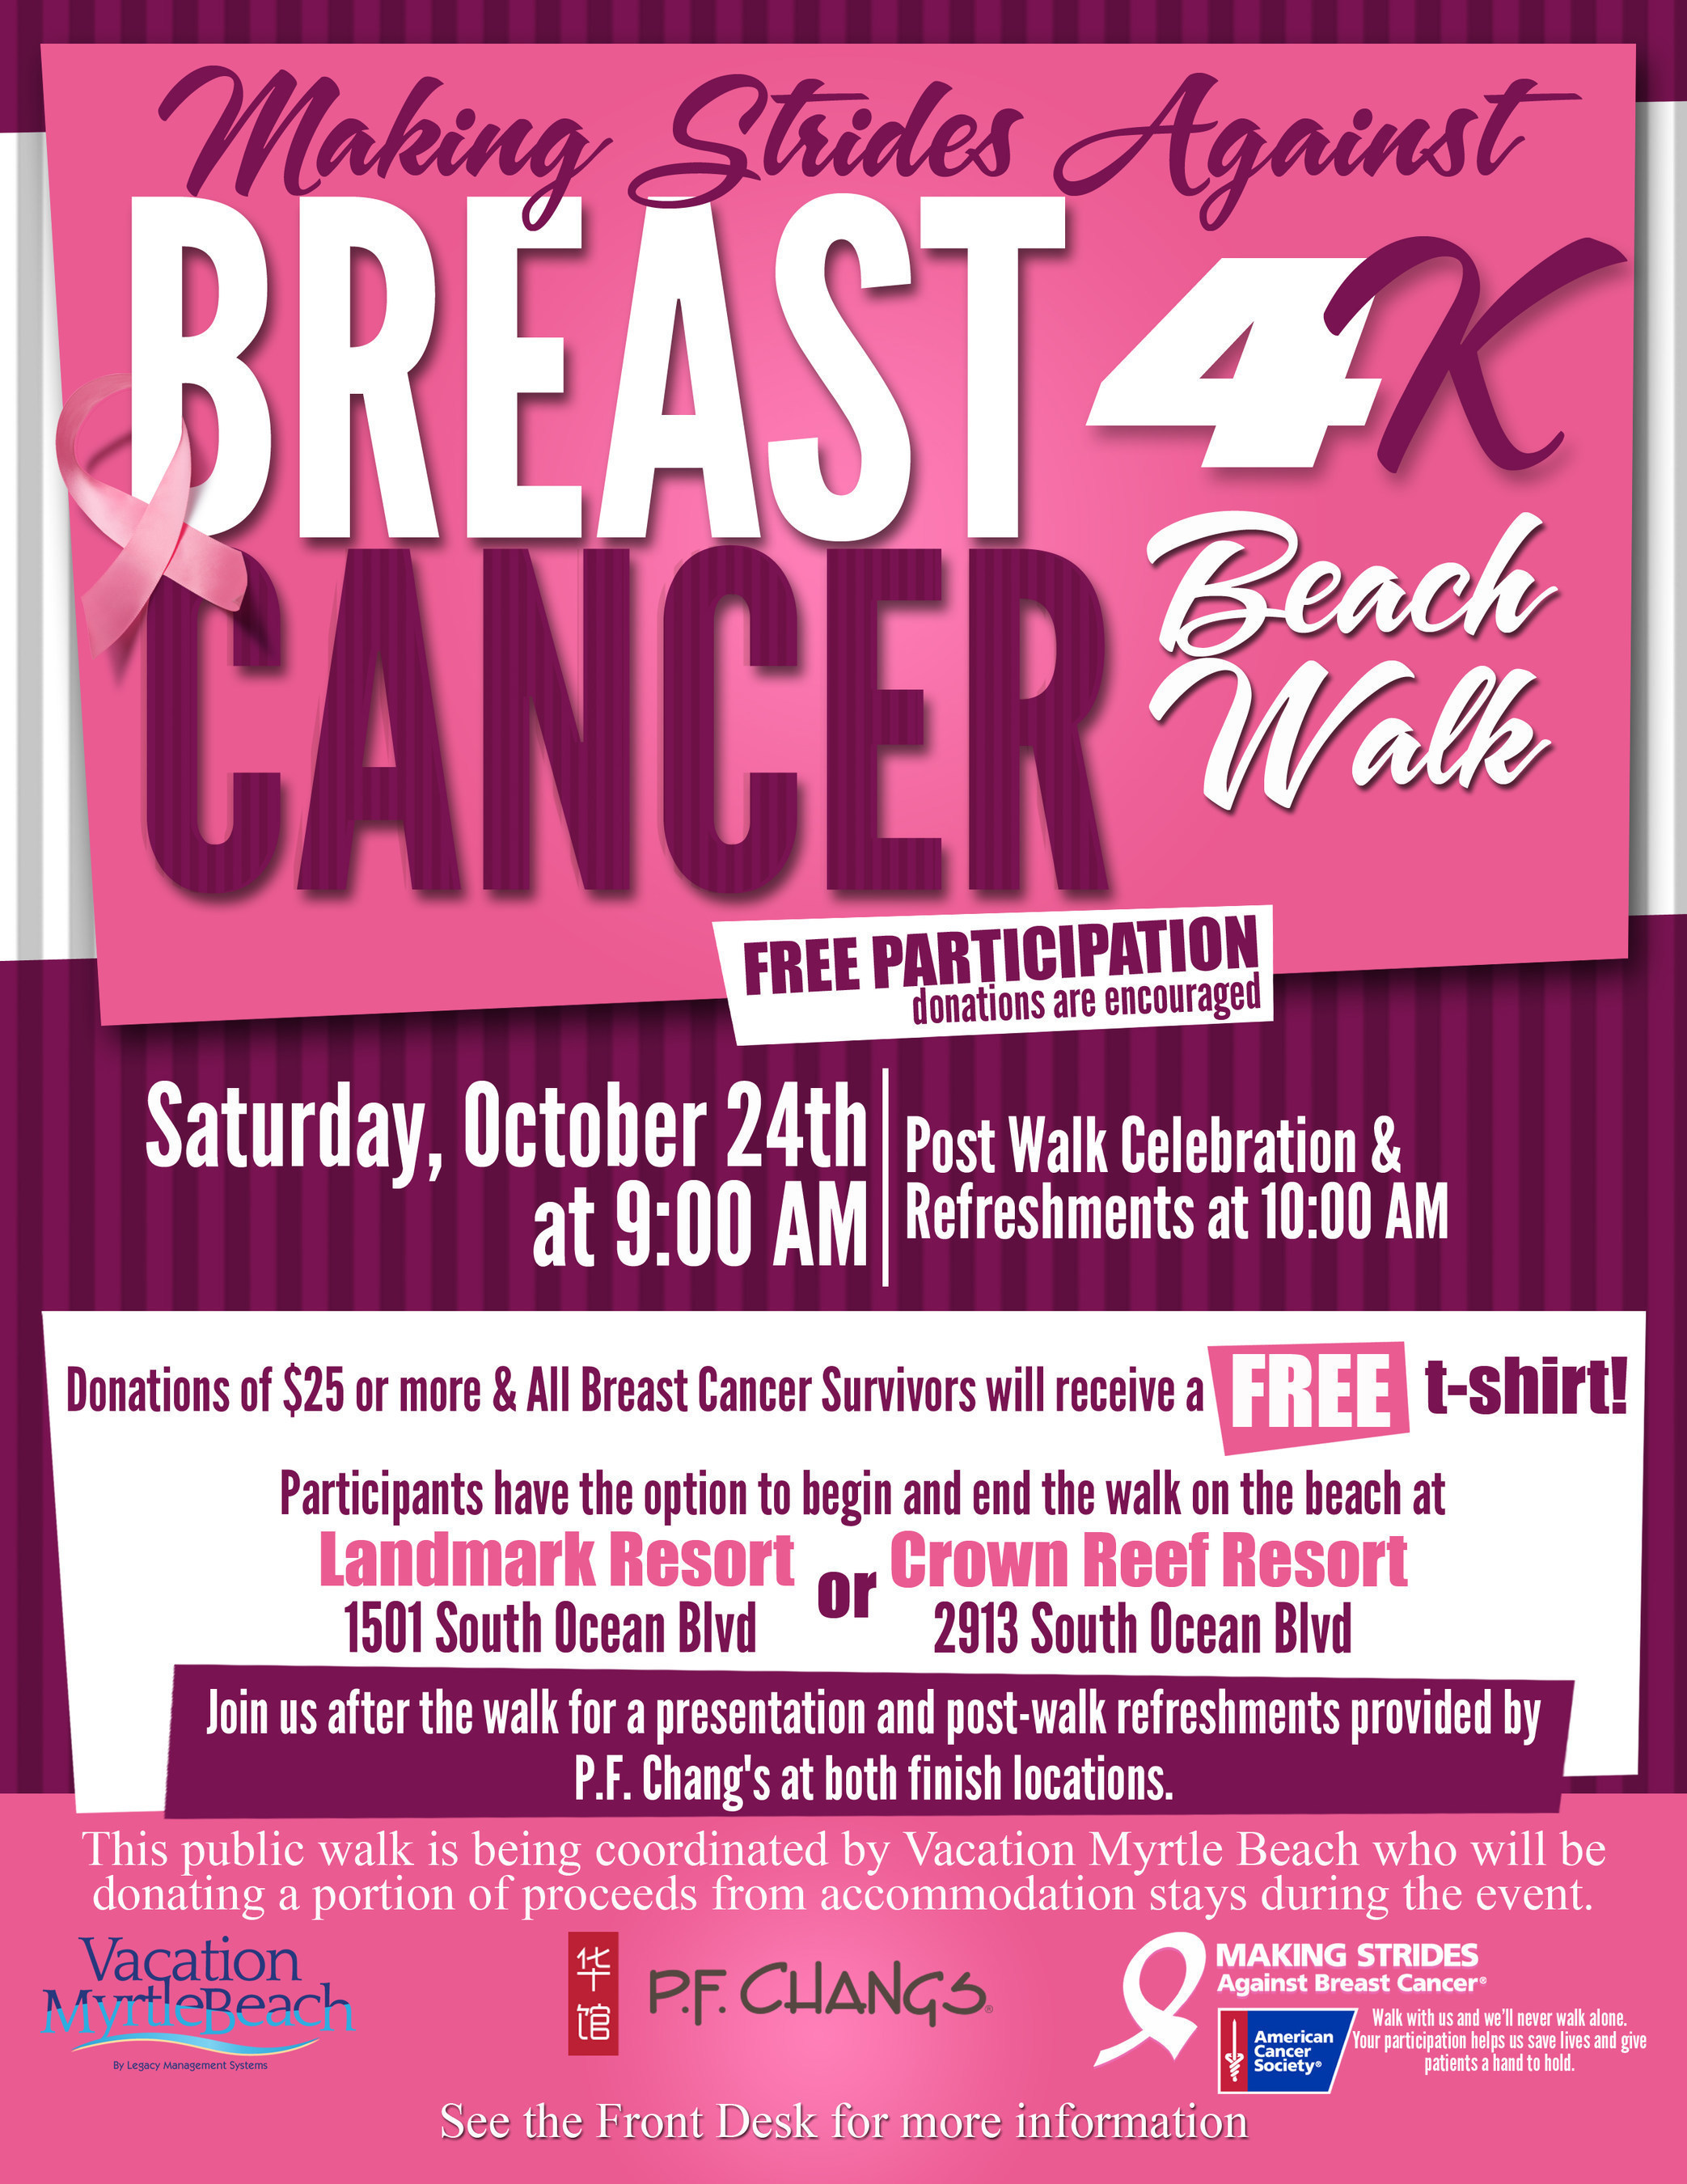 The Vacation Myrtle Beach resort group announced a partnership with the American Cancer Society to create the inaugural Making Strides Against Breast Cancer Beach Walk on Saturday, October 24.